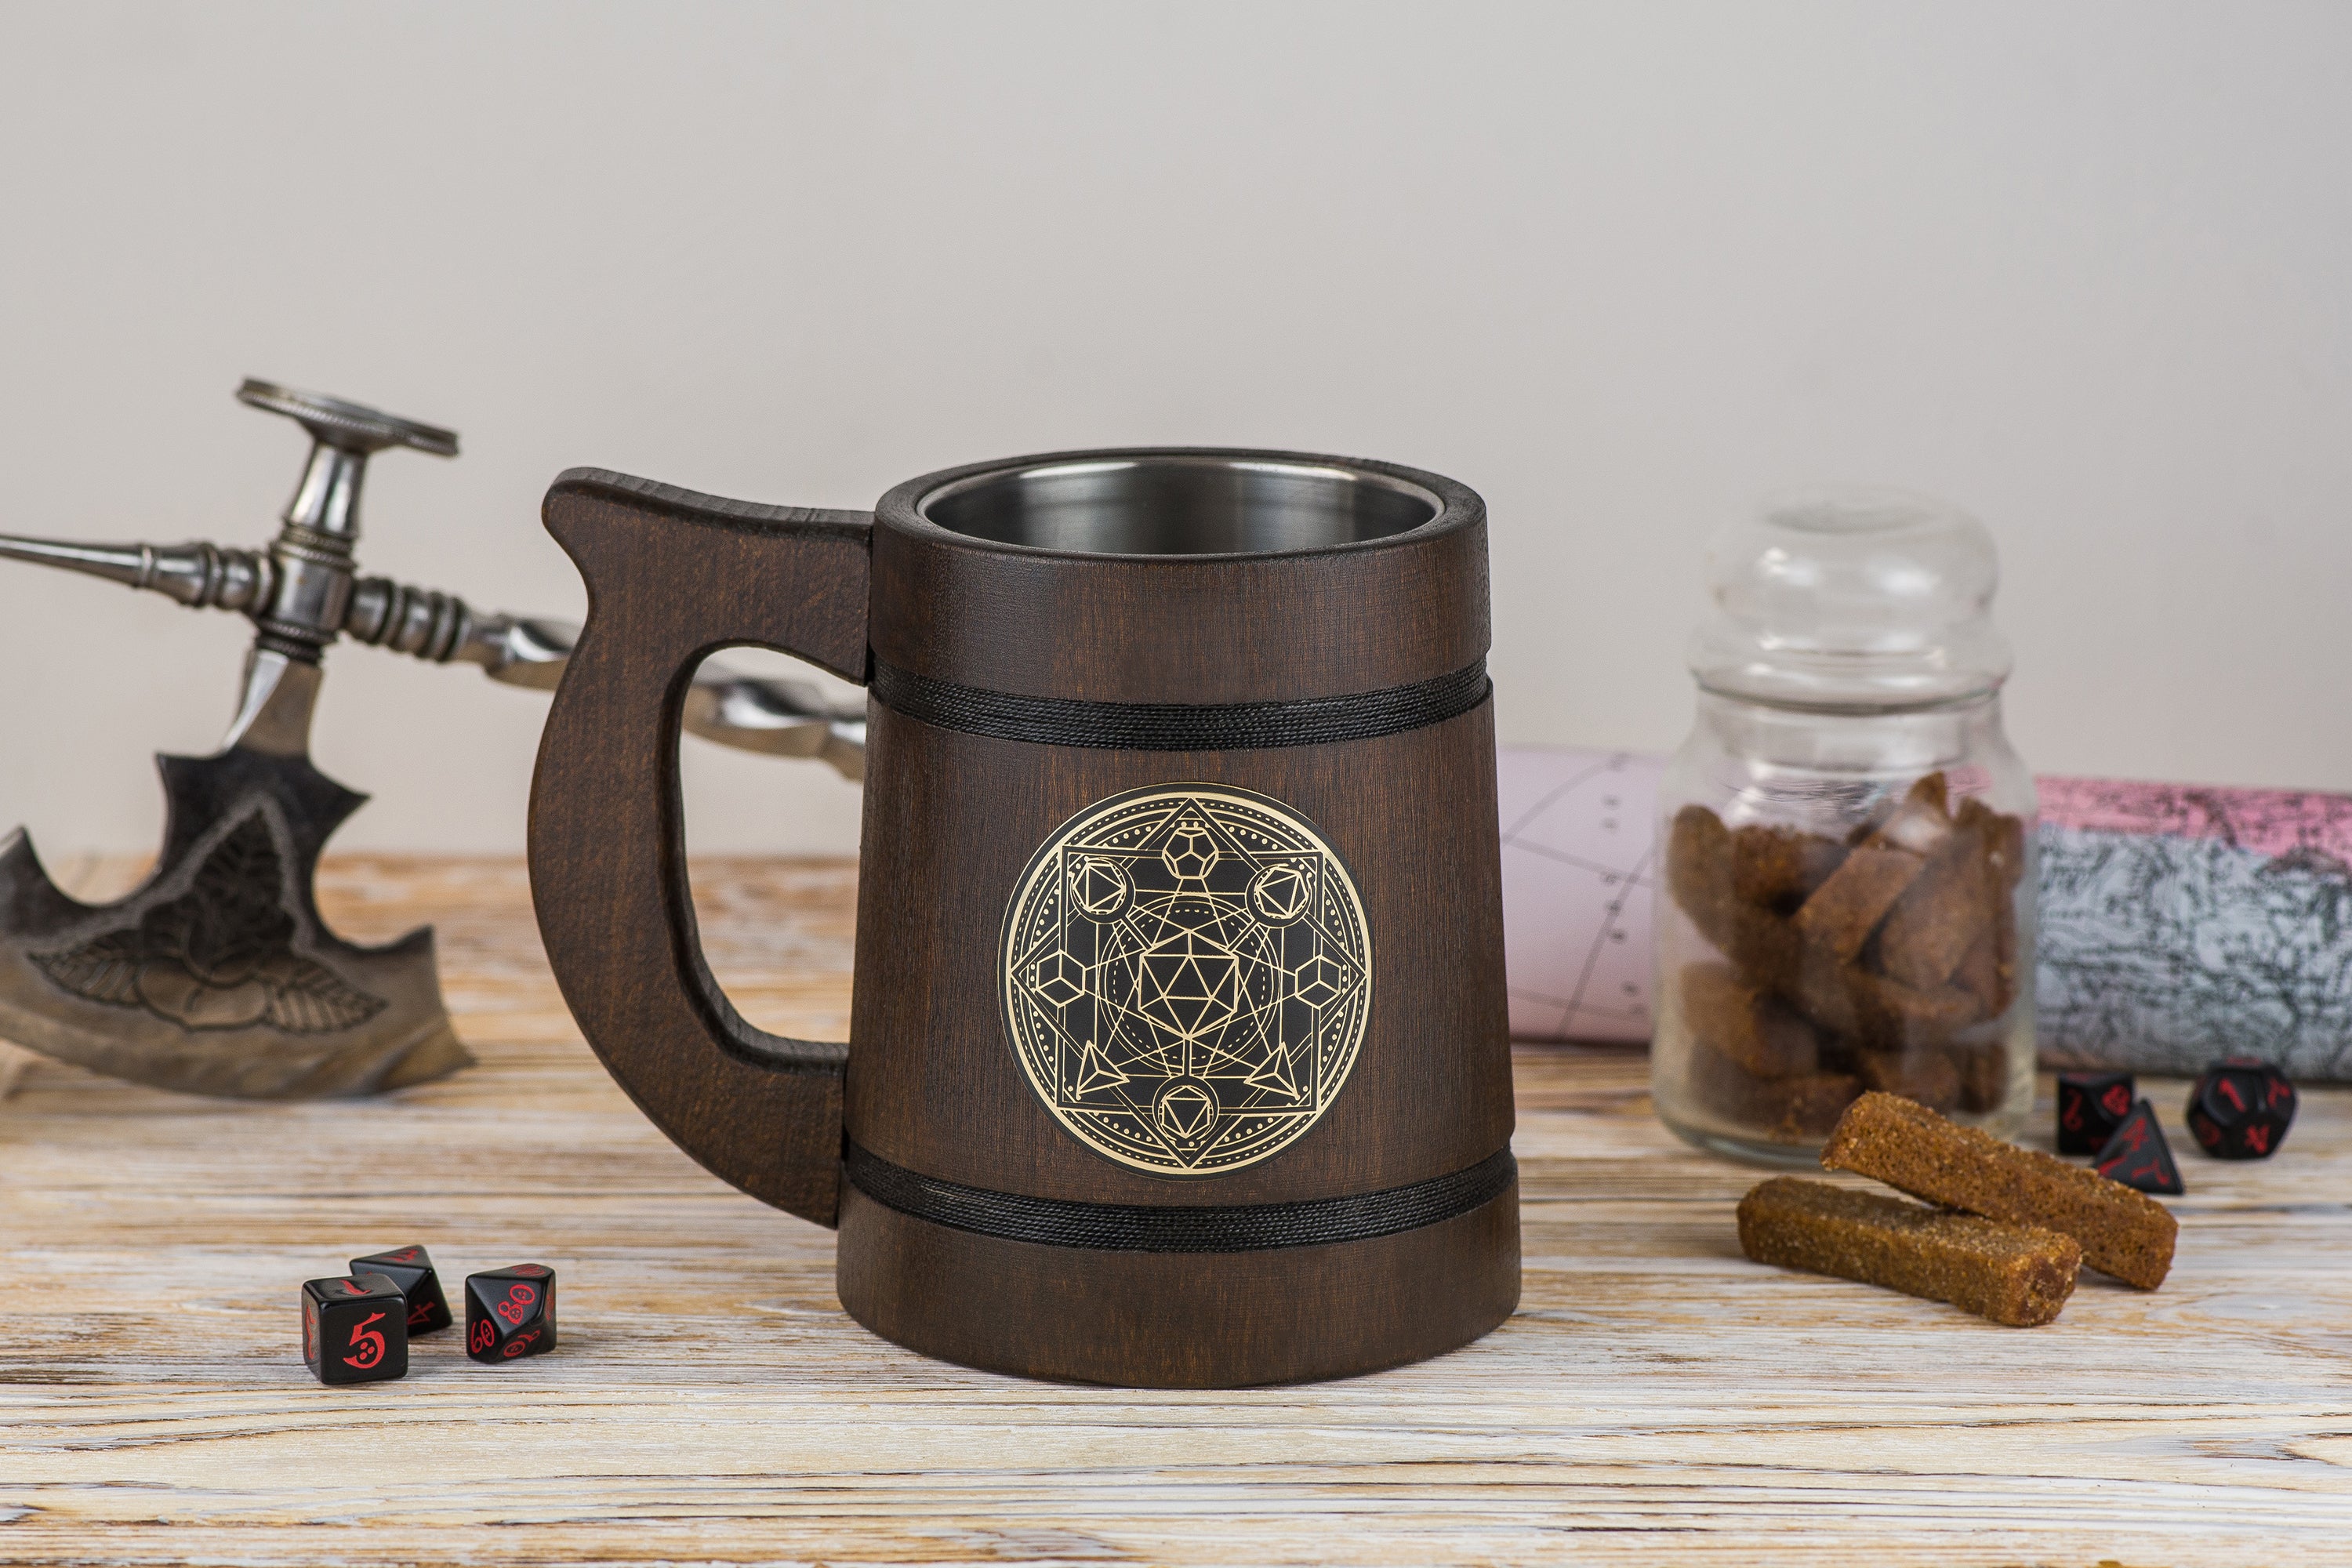 DnD mug with engraved plaque "D20 Magic Circle", DND Mugs - GravisCup